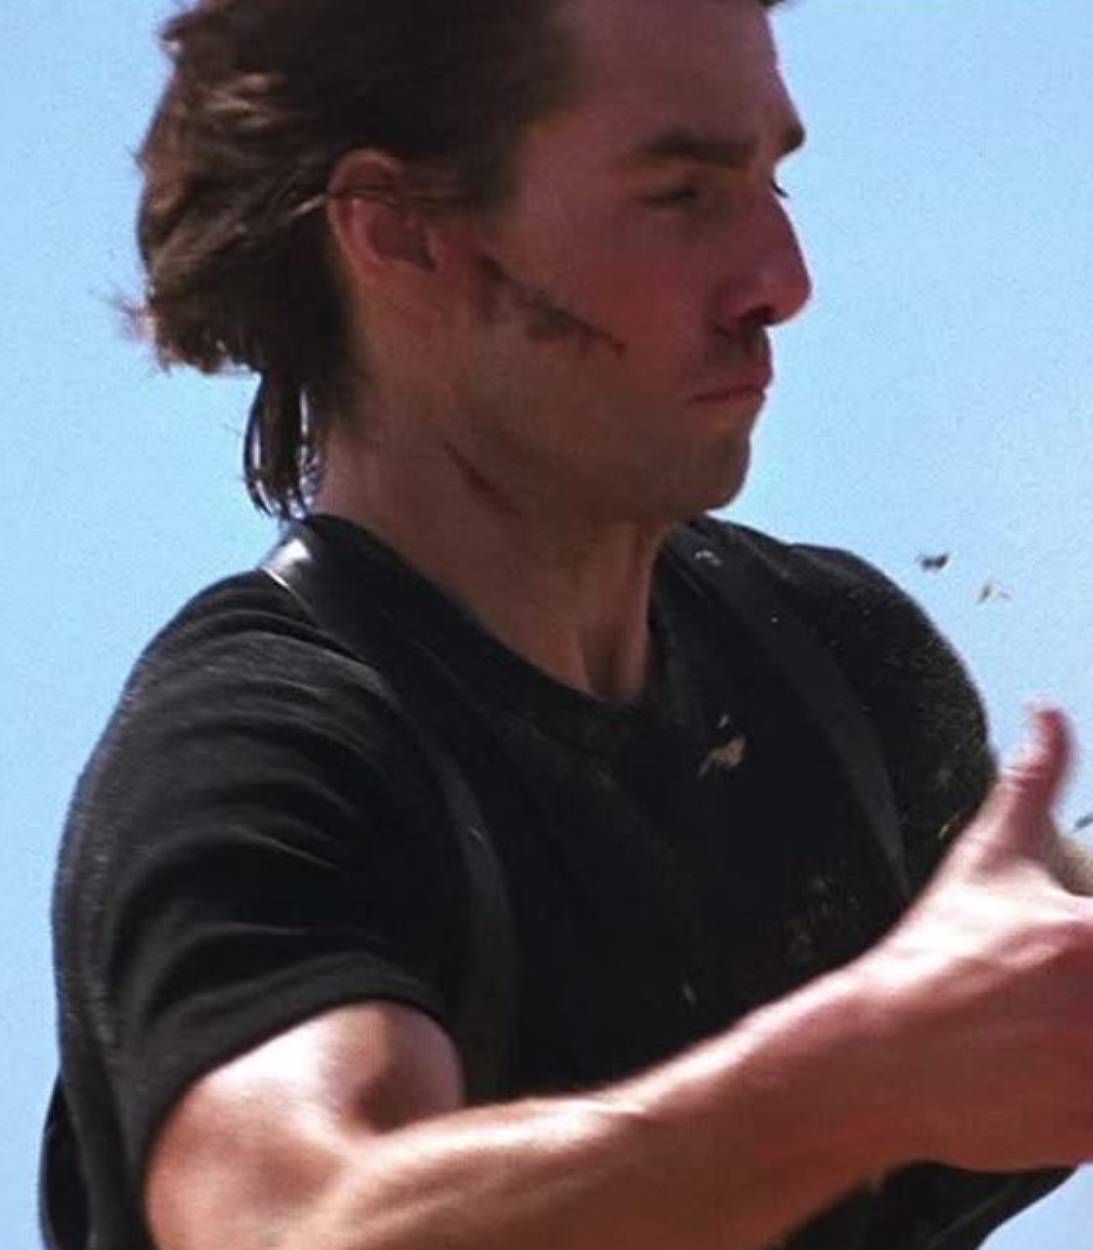 Tom Cruise Mission Impossible 2 image pic vertical